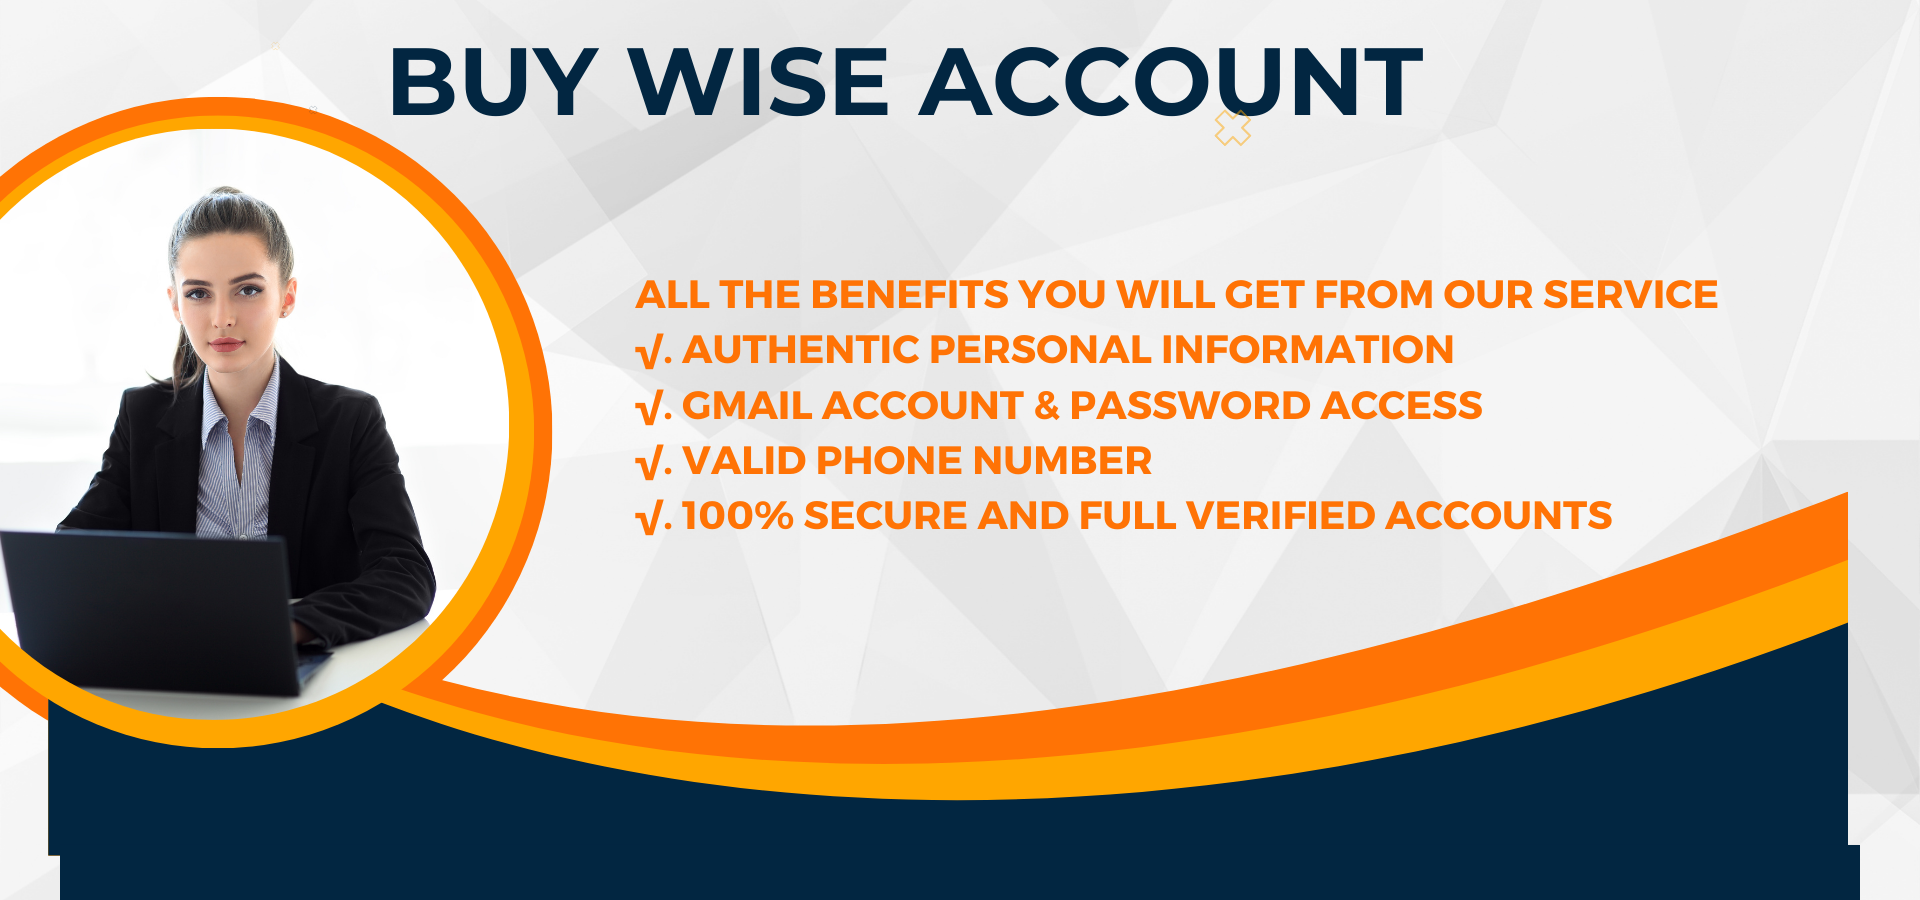 Buy Wise Account
